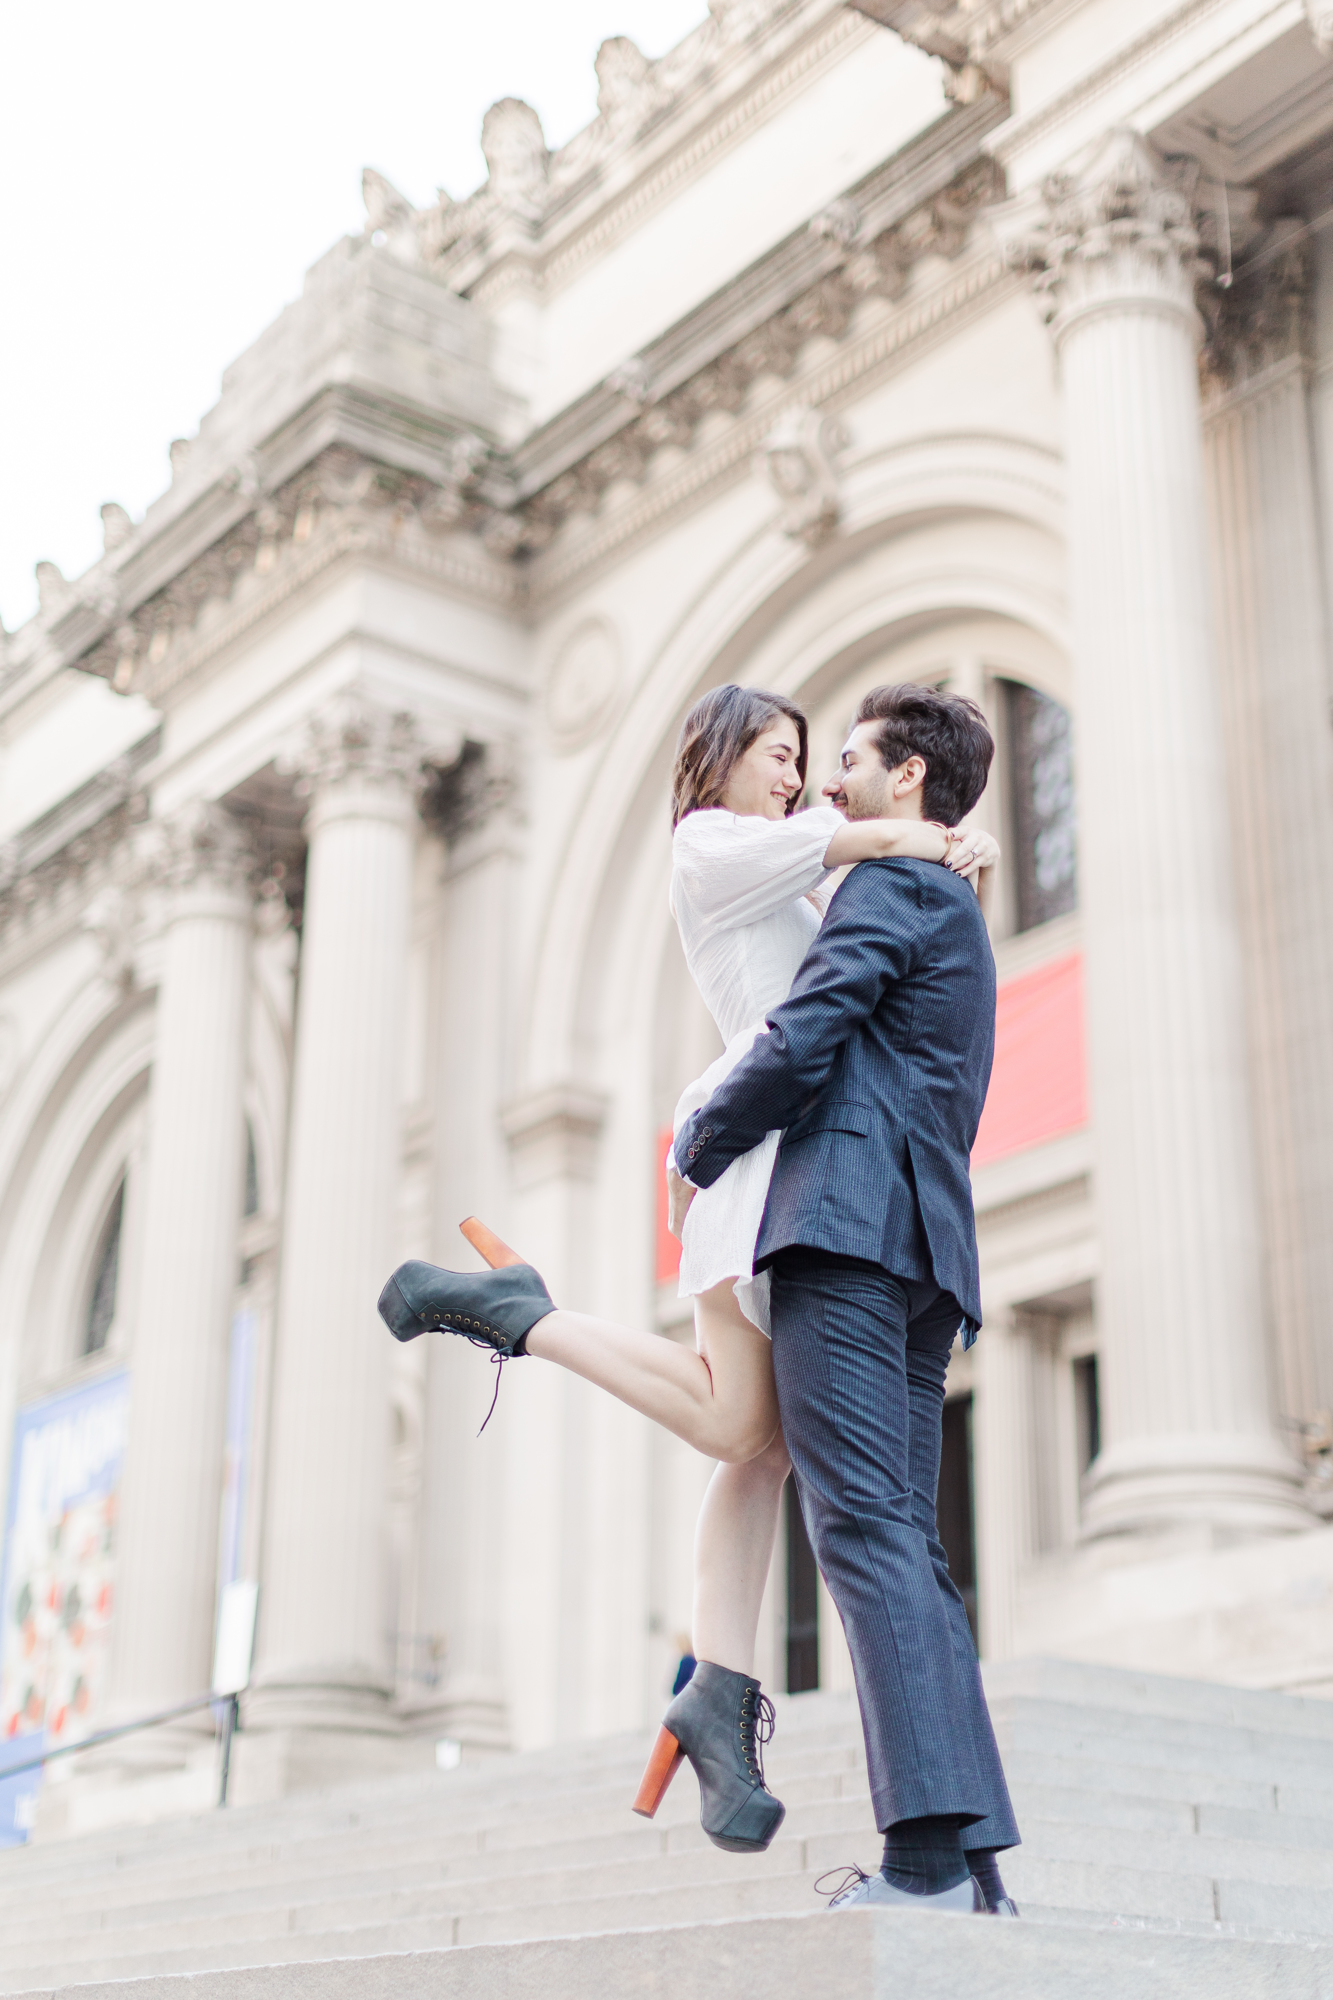 Joyous Central Park Engagement Photos in NYC